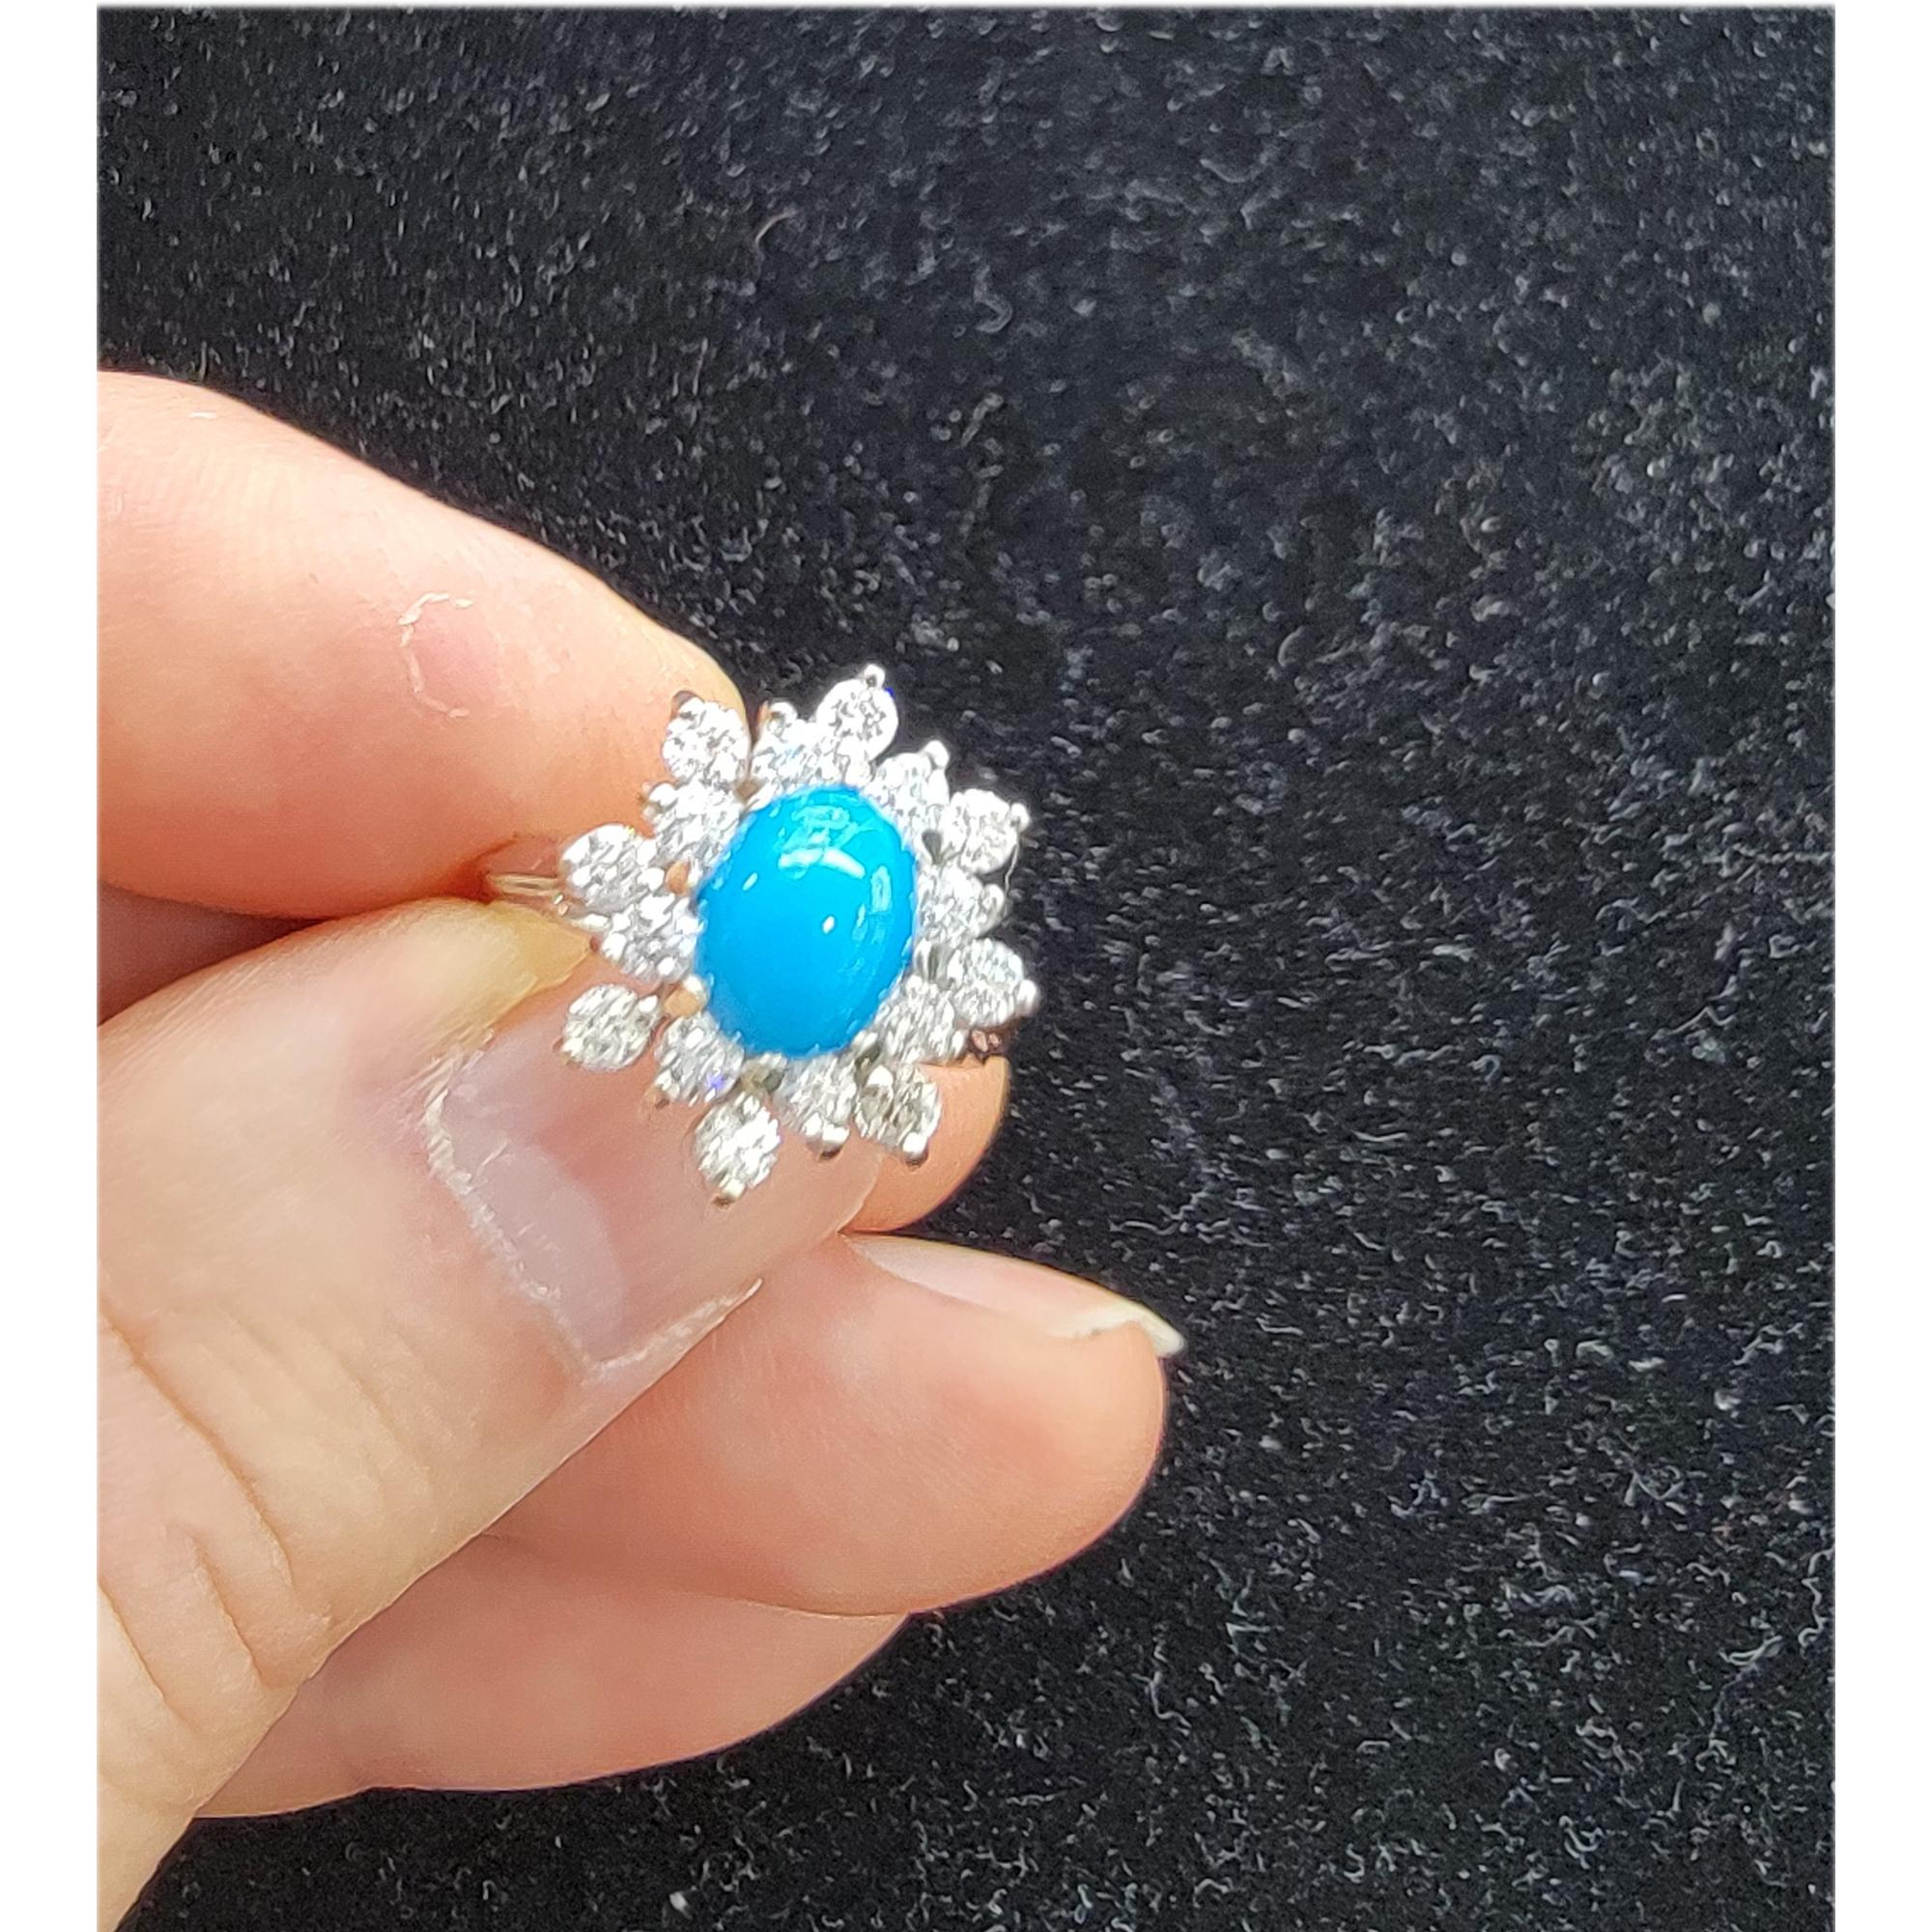 Vintage Brilliant Turquoise Ring with Diamonds
14k White Gold 8.70 grams
overall design size is approx. 20mm
finger size 7
Diamonds all round in cluster type design
Circa 1950